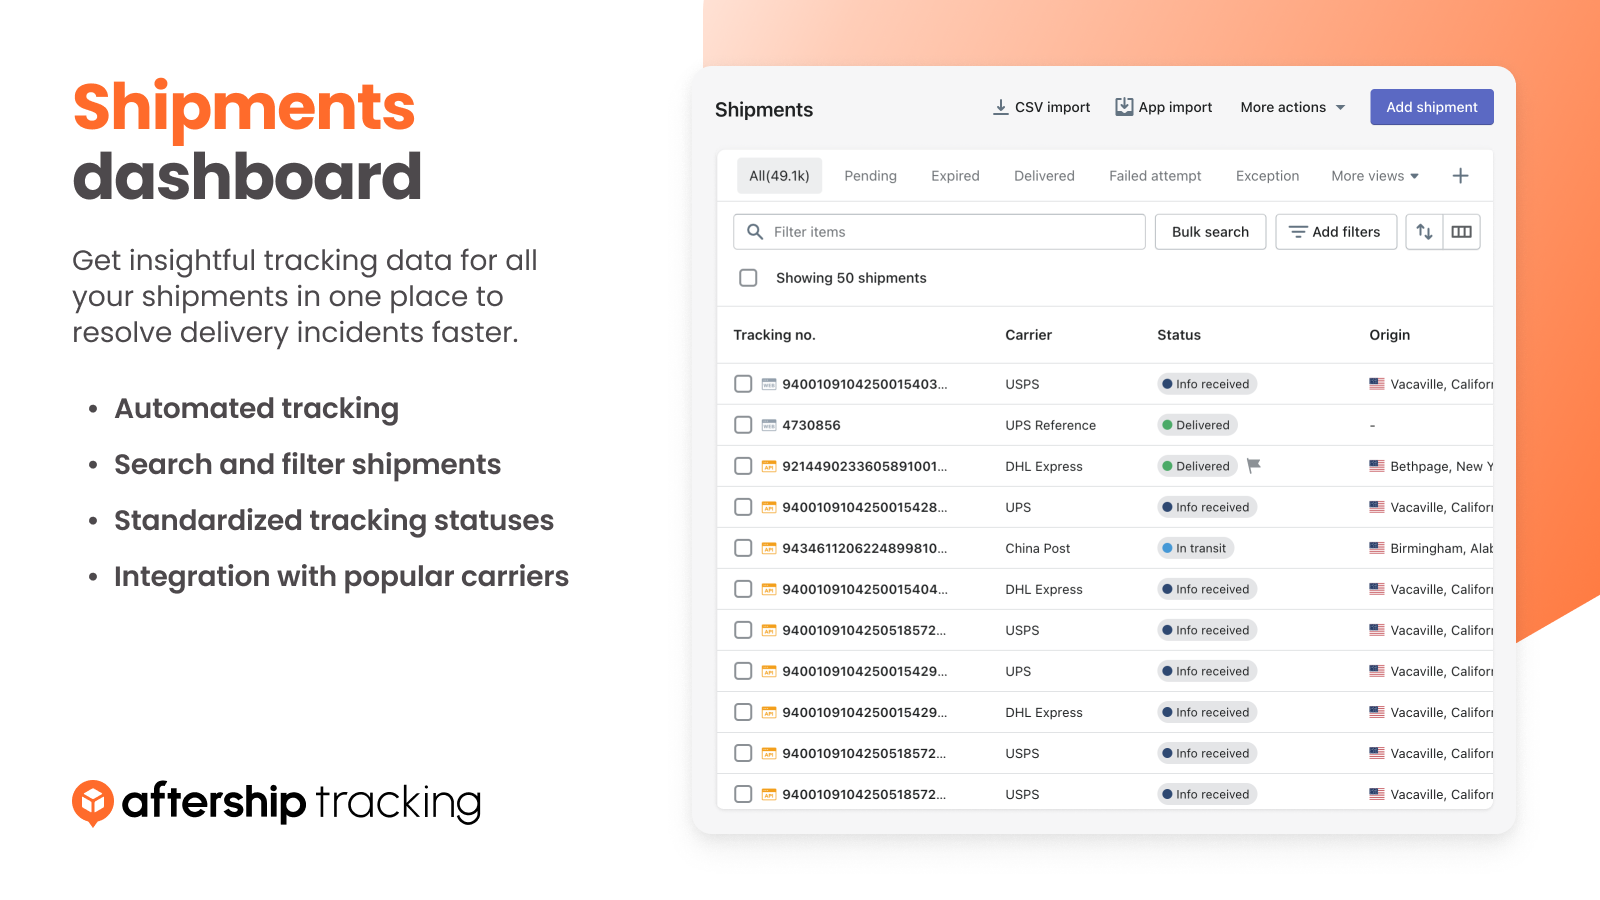  Track all shipments in one place